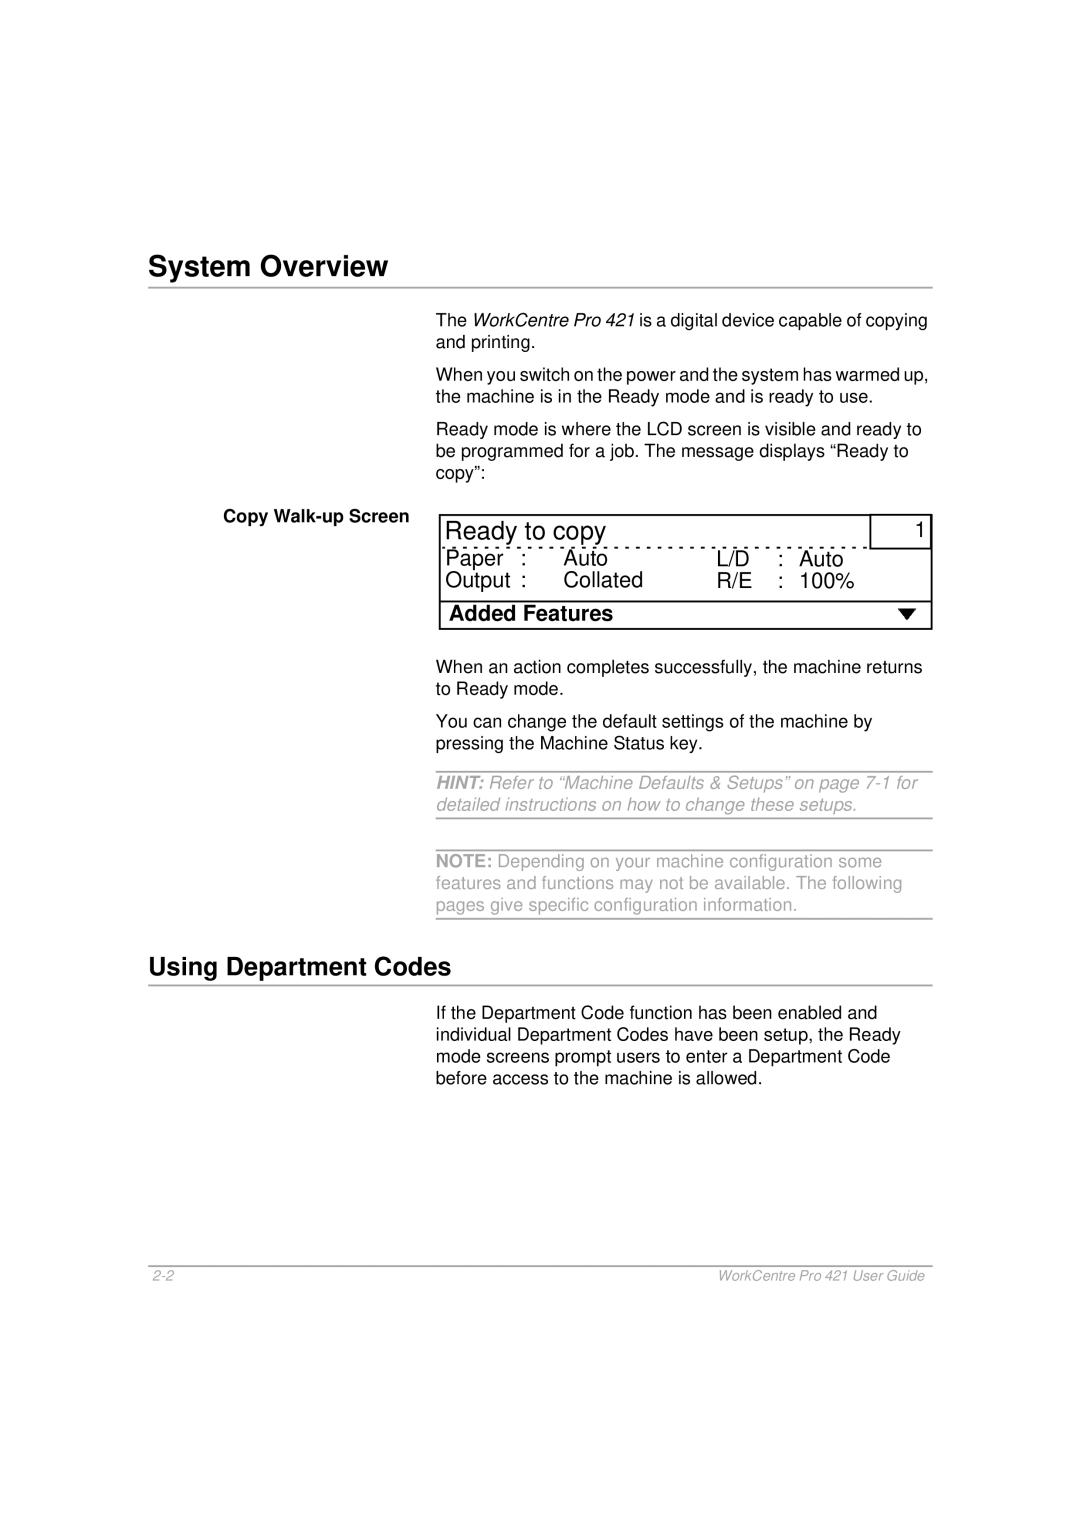 Xerox 421 manual System Overview, Ready to copy, Using Department Codes, Paper Auto Output Collated 100%, Added Features 